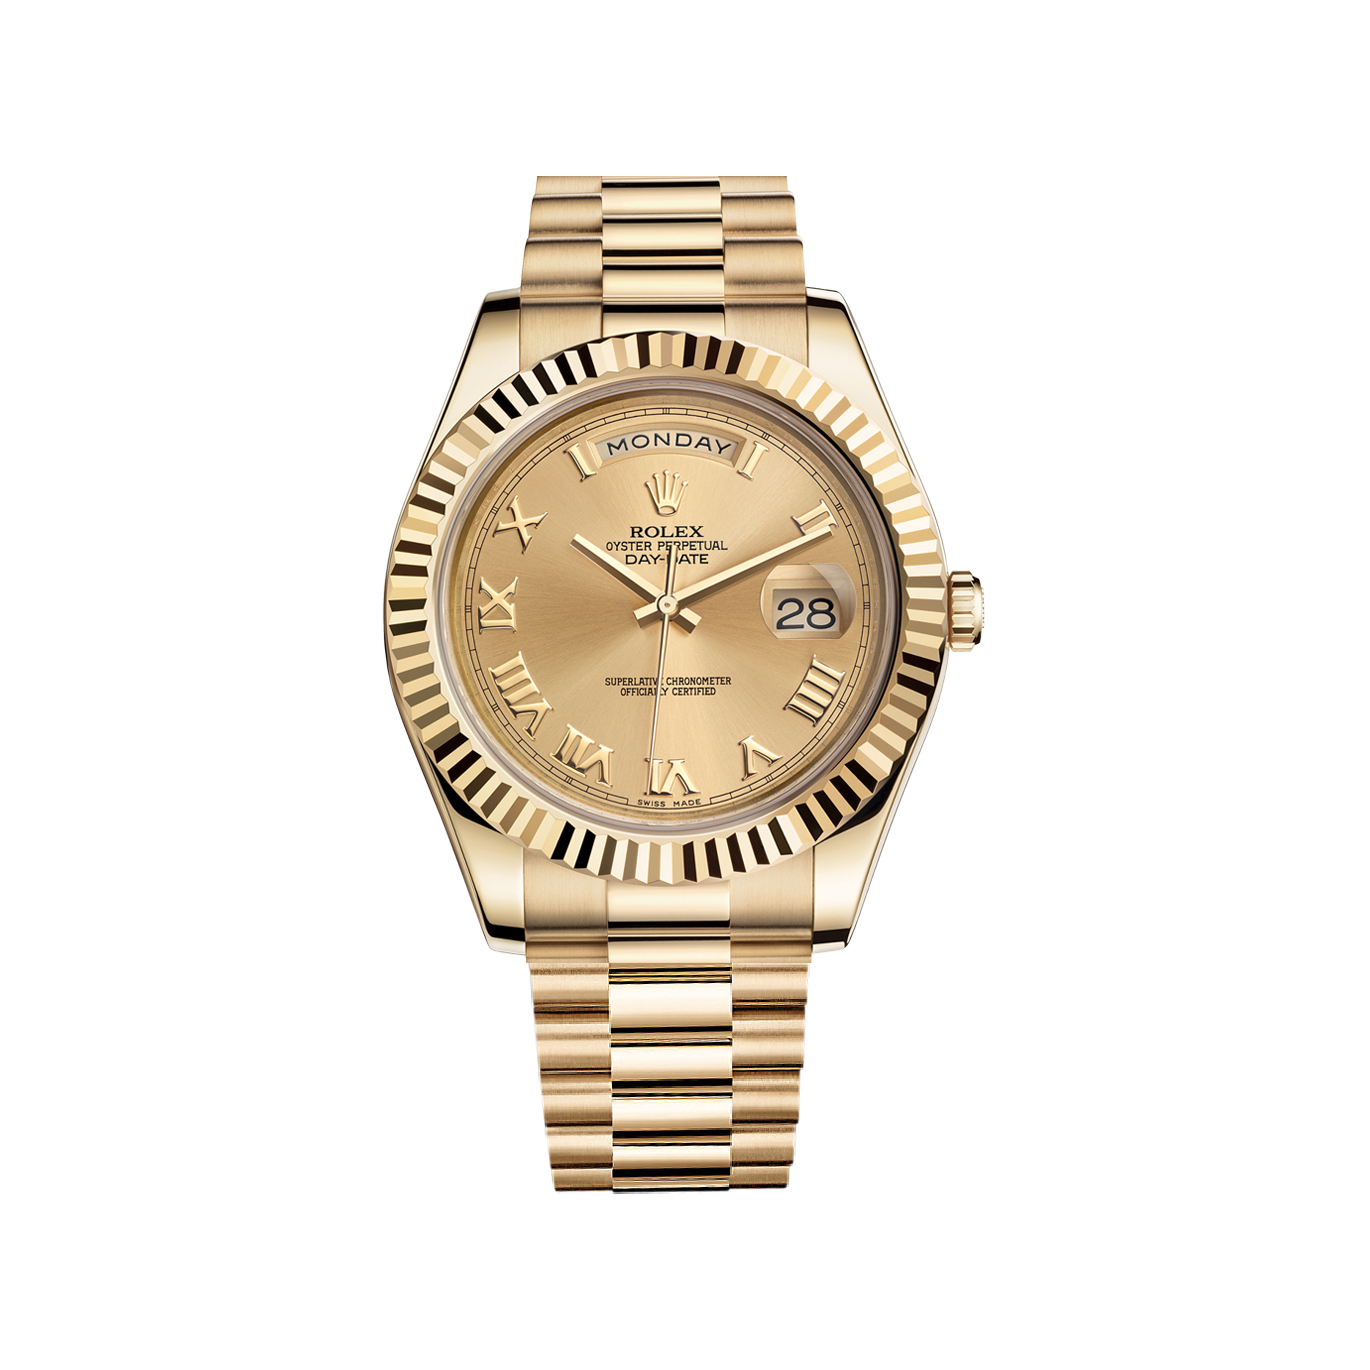 Day-Date II 218238 Gold Watch (Champagne)